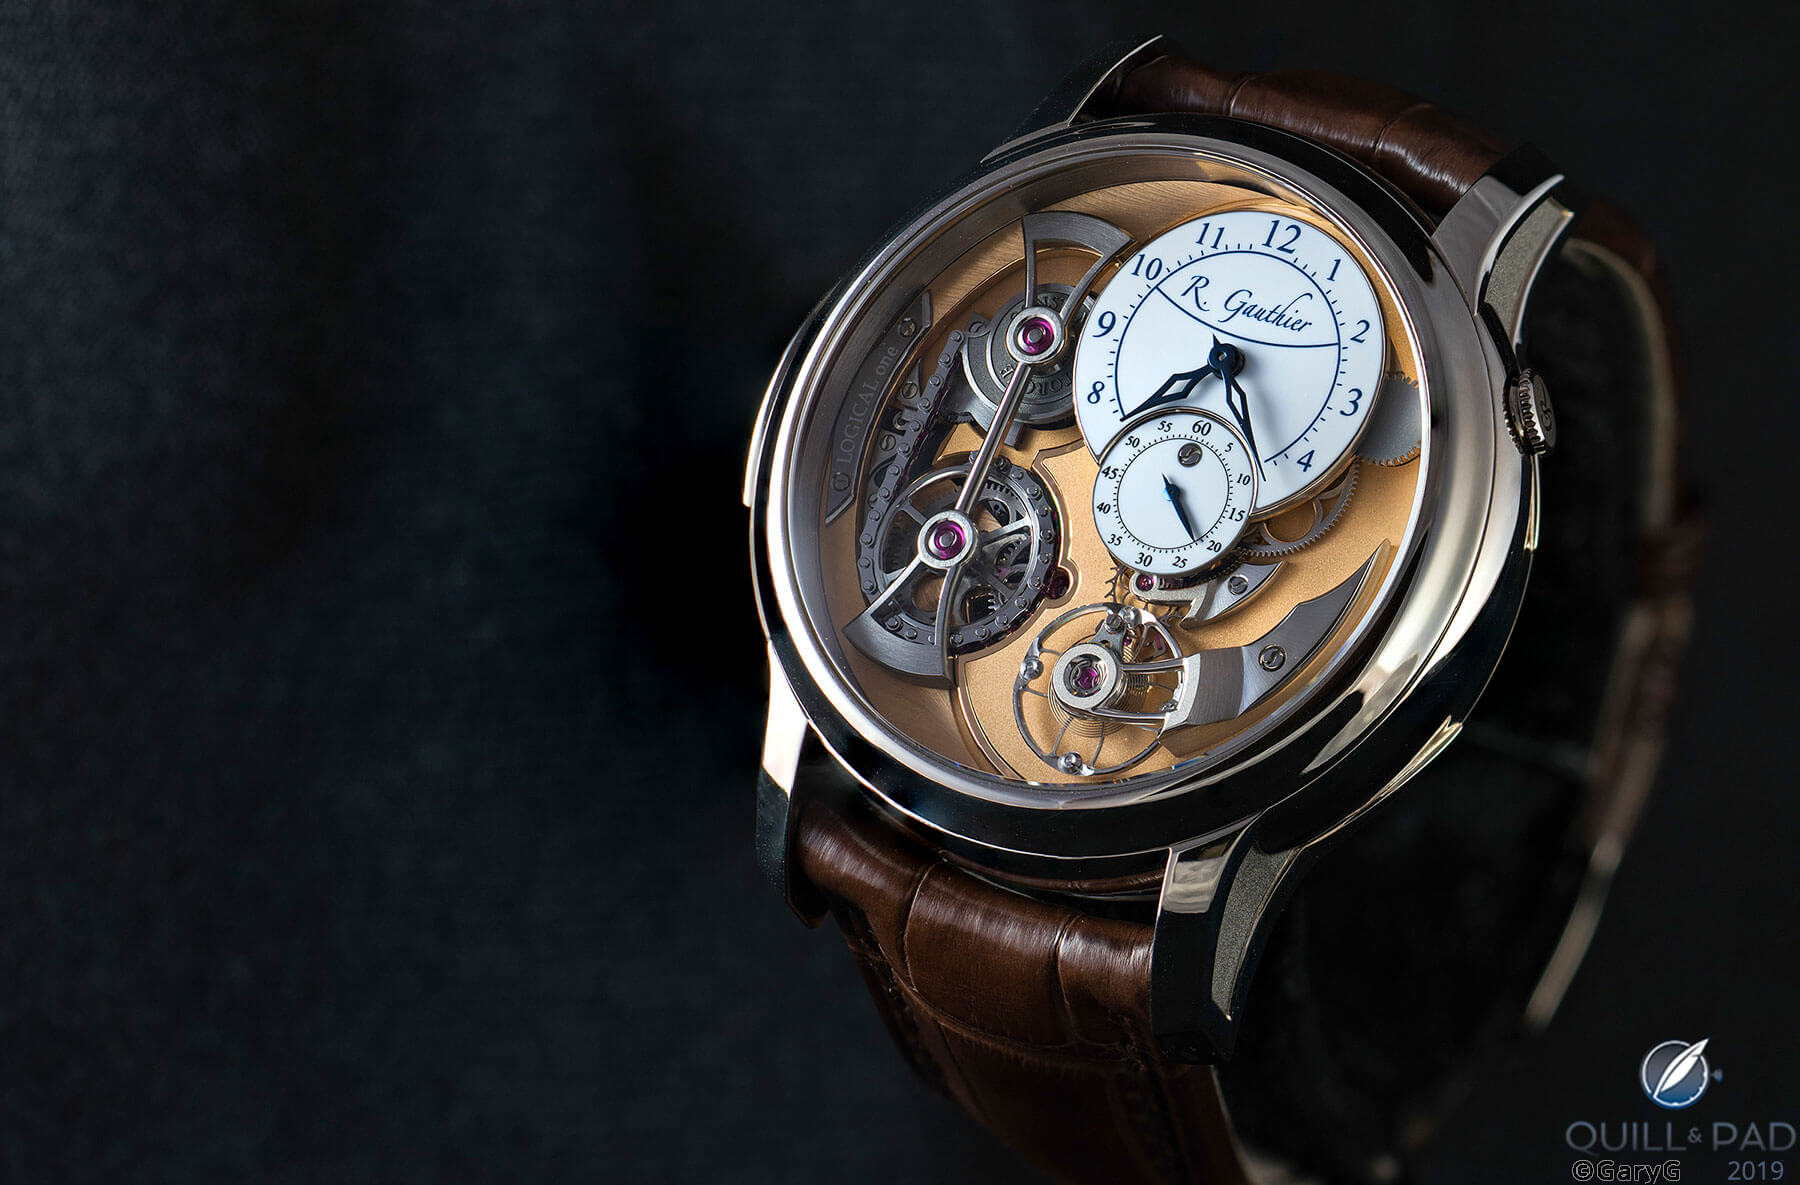 Why I Bought It: Romain Gauthier Logical One - Reprise - Quill & Pad